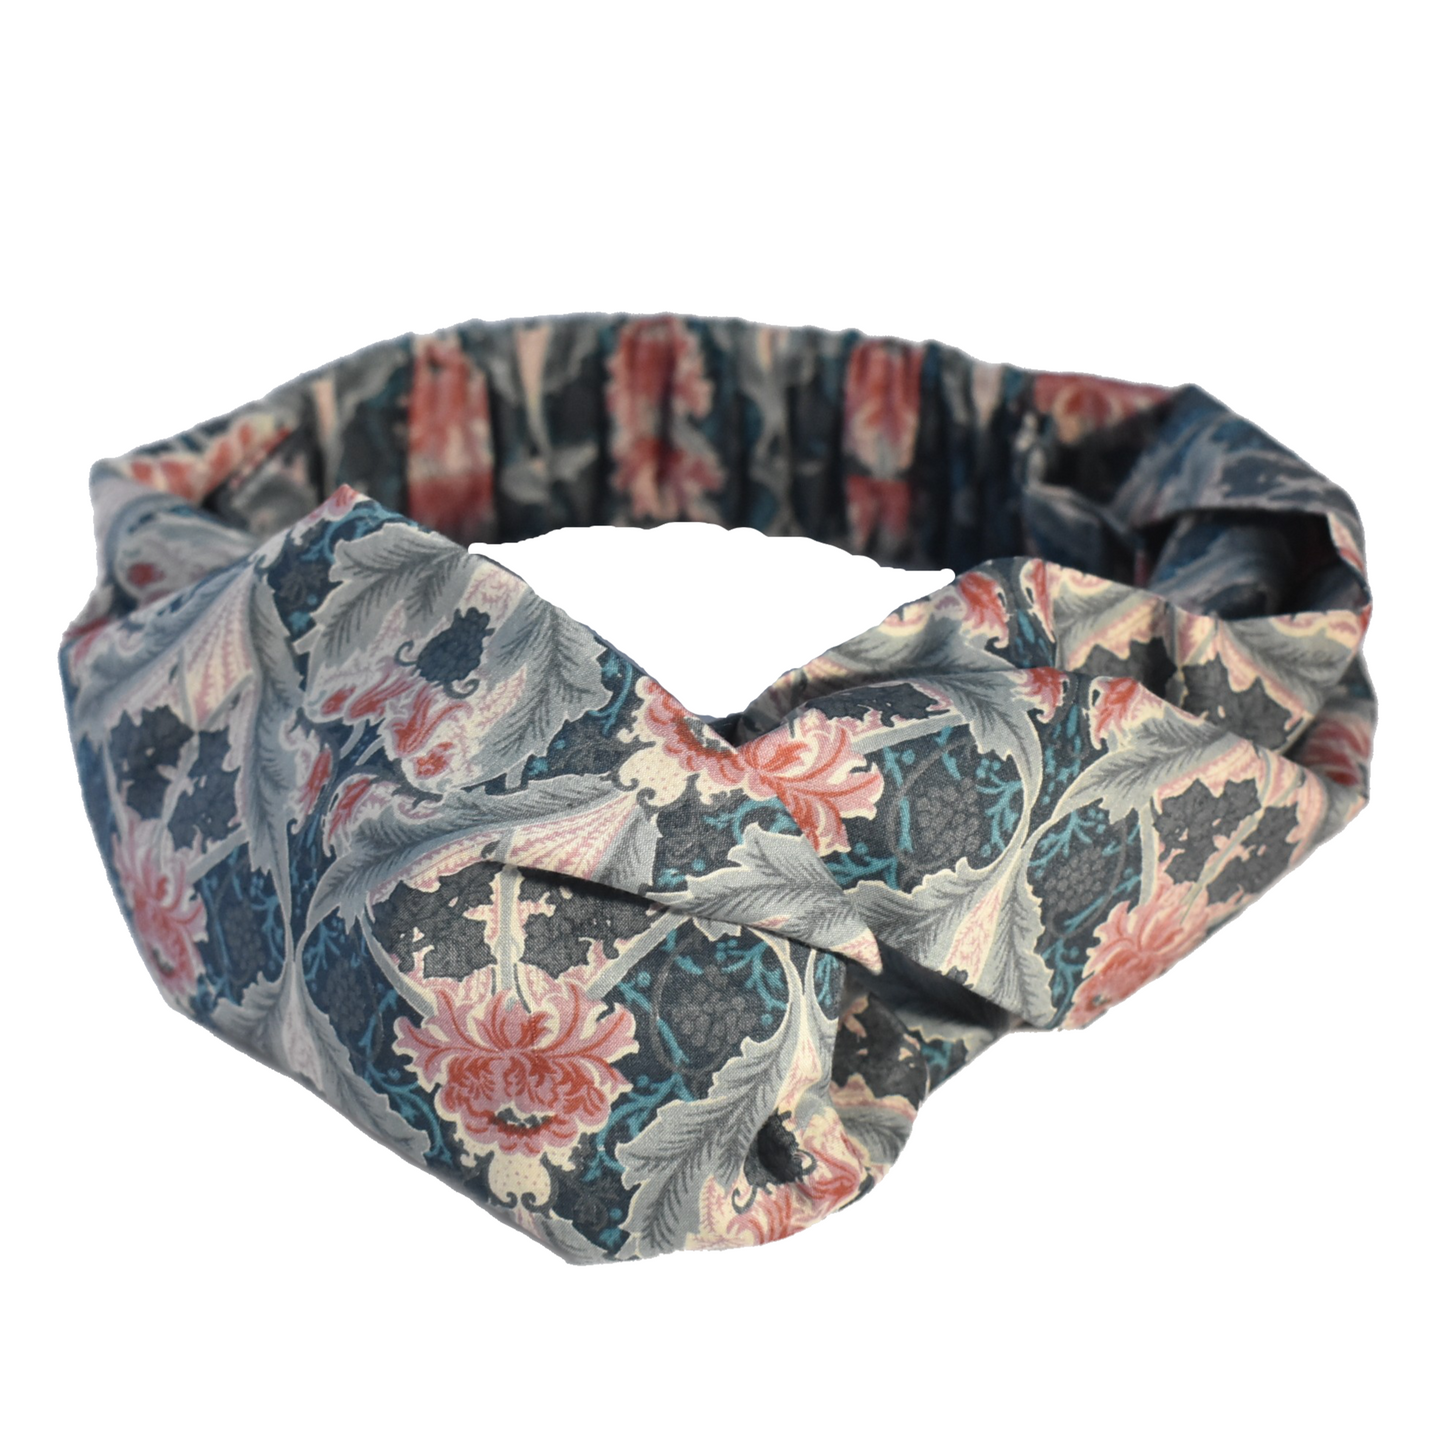 Kids Tot Knot Twisted hairband -Vintage Liberty of London Pink Peonie print